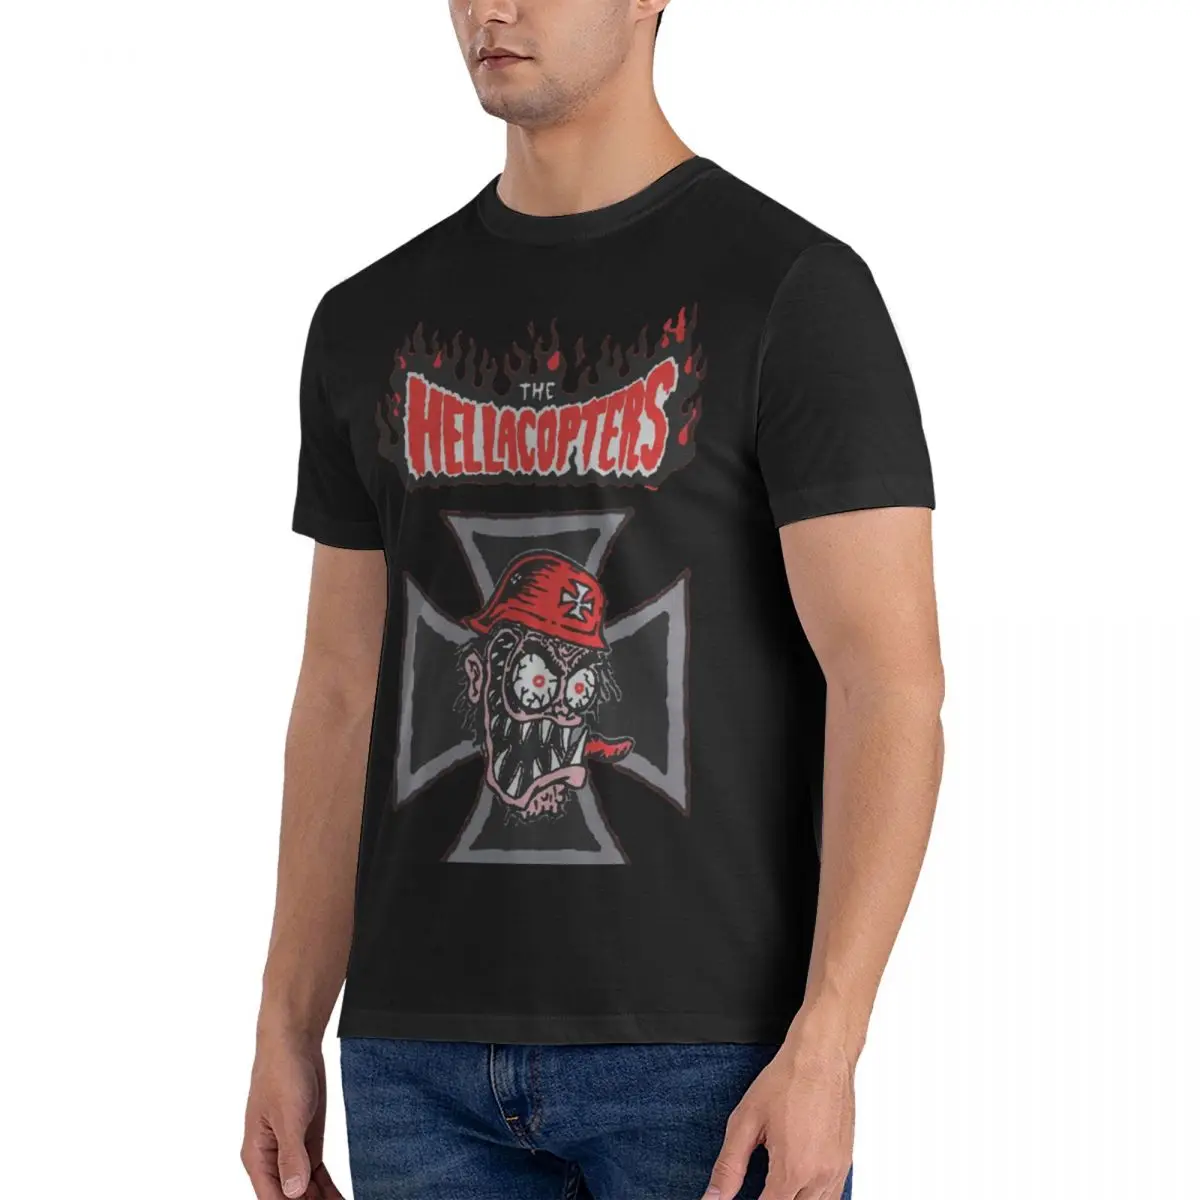 Cross T-Shirts Men Hellacopters Funny 100% Cotton Tees Crew Neck Short Sleeve T Shirts Birthday Gift Clothing